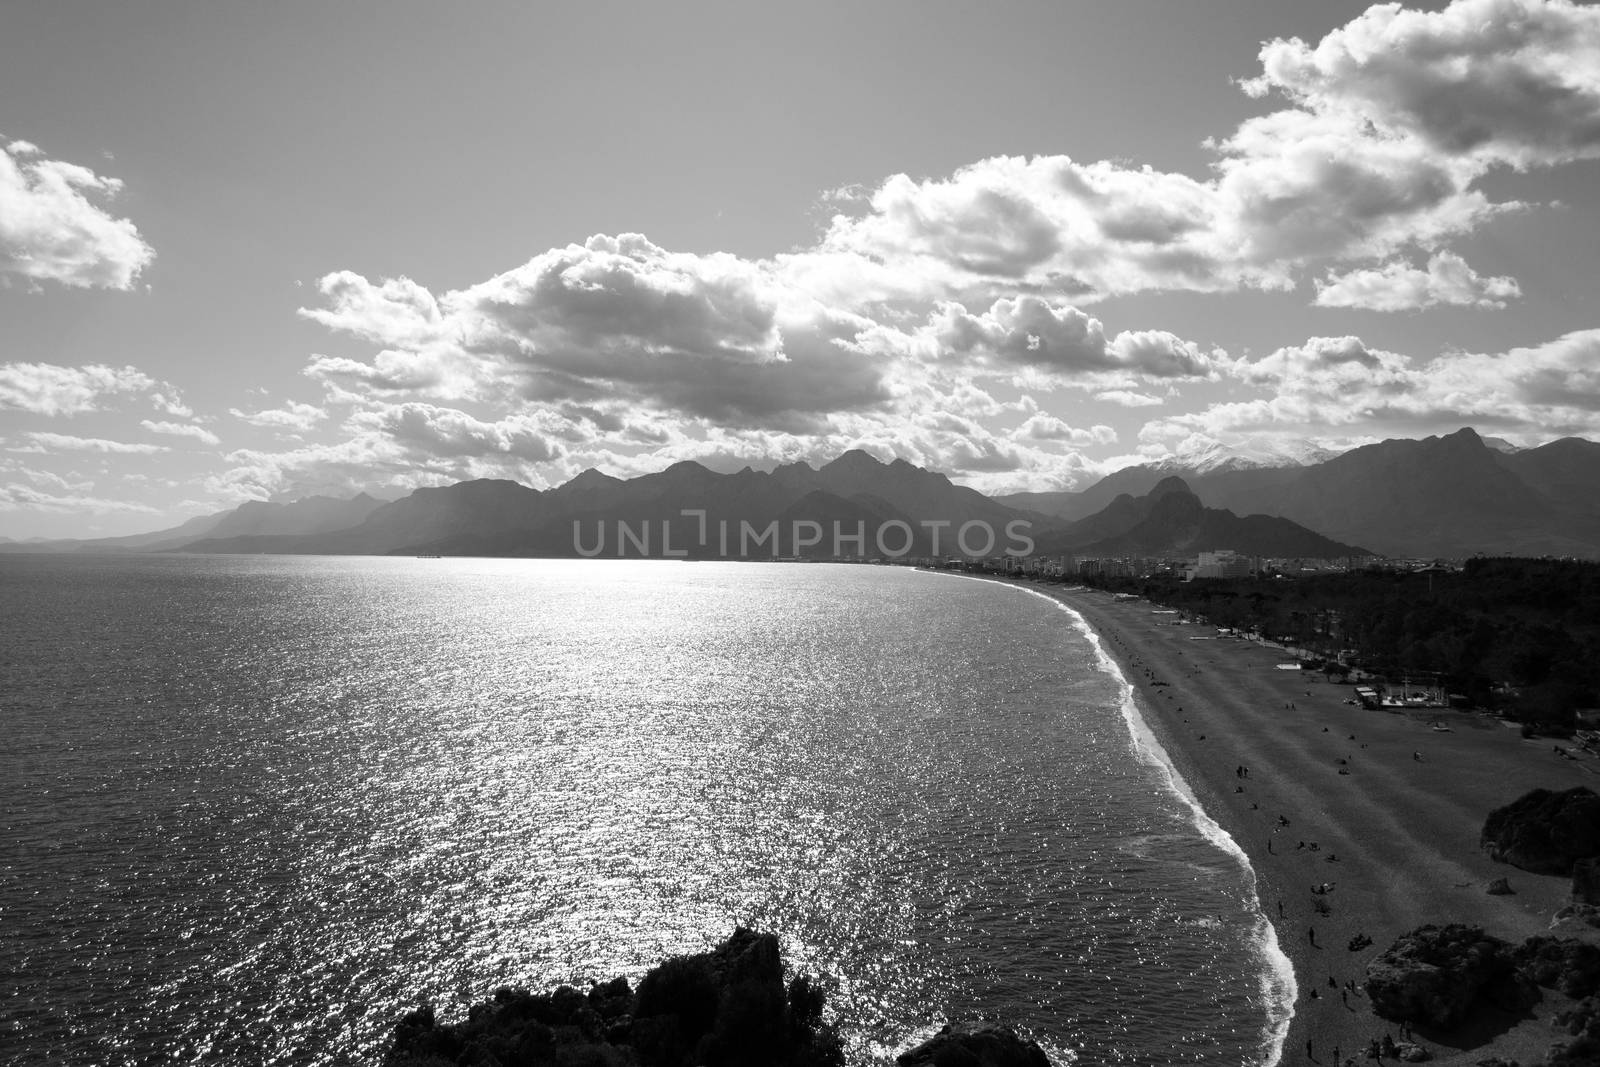 Afternoon in antalya in black and white by rmbarricarte